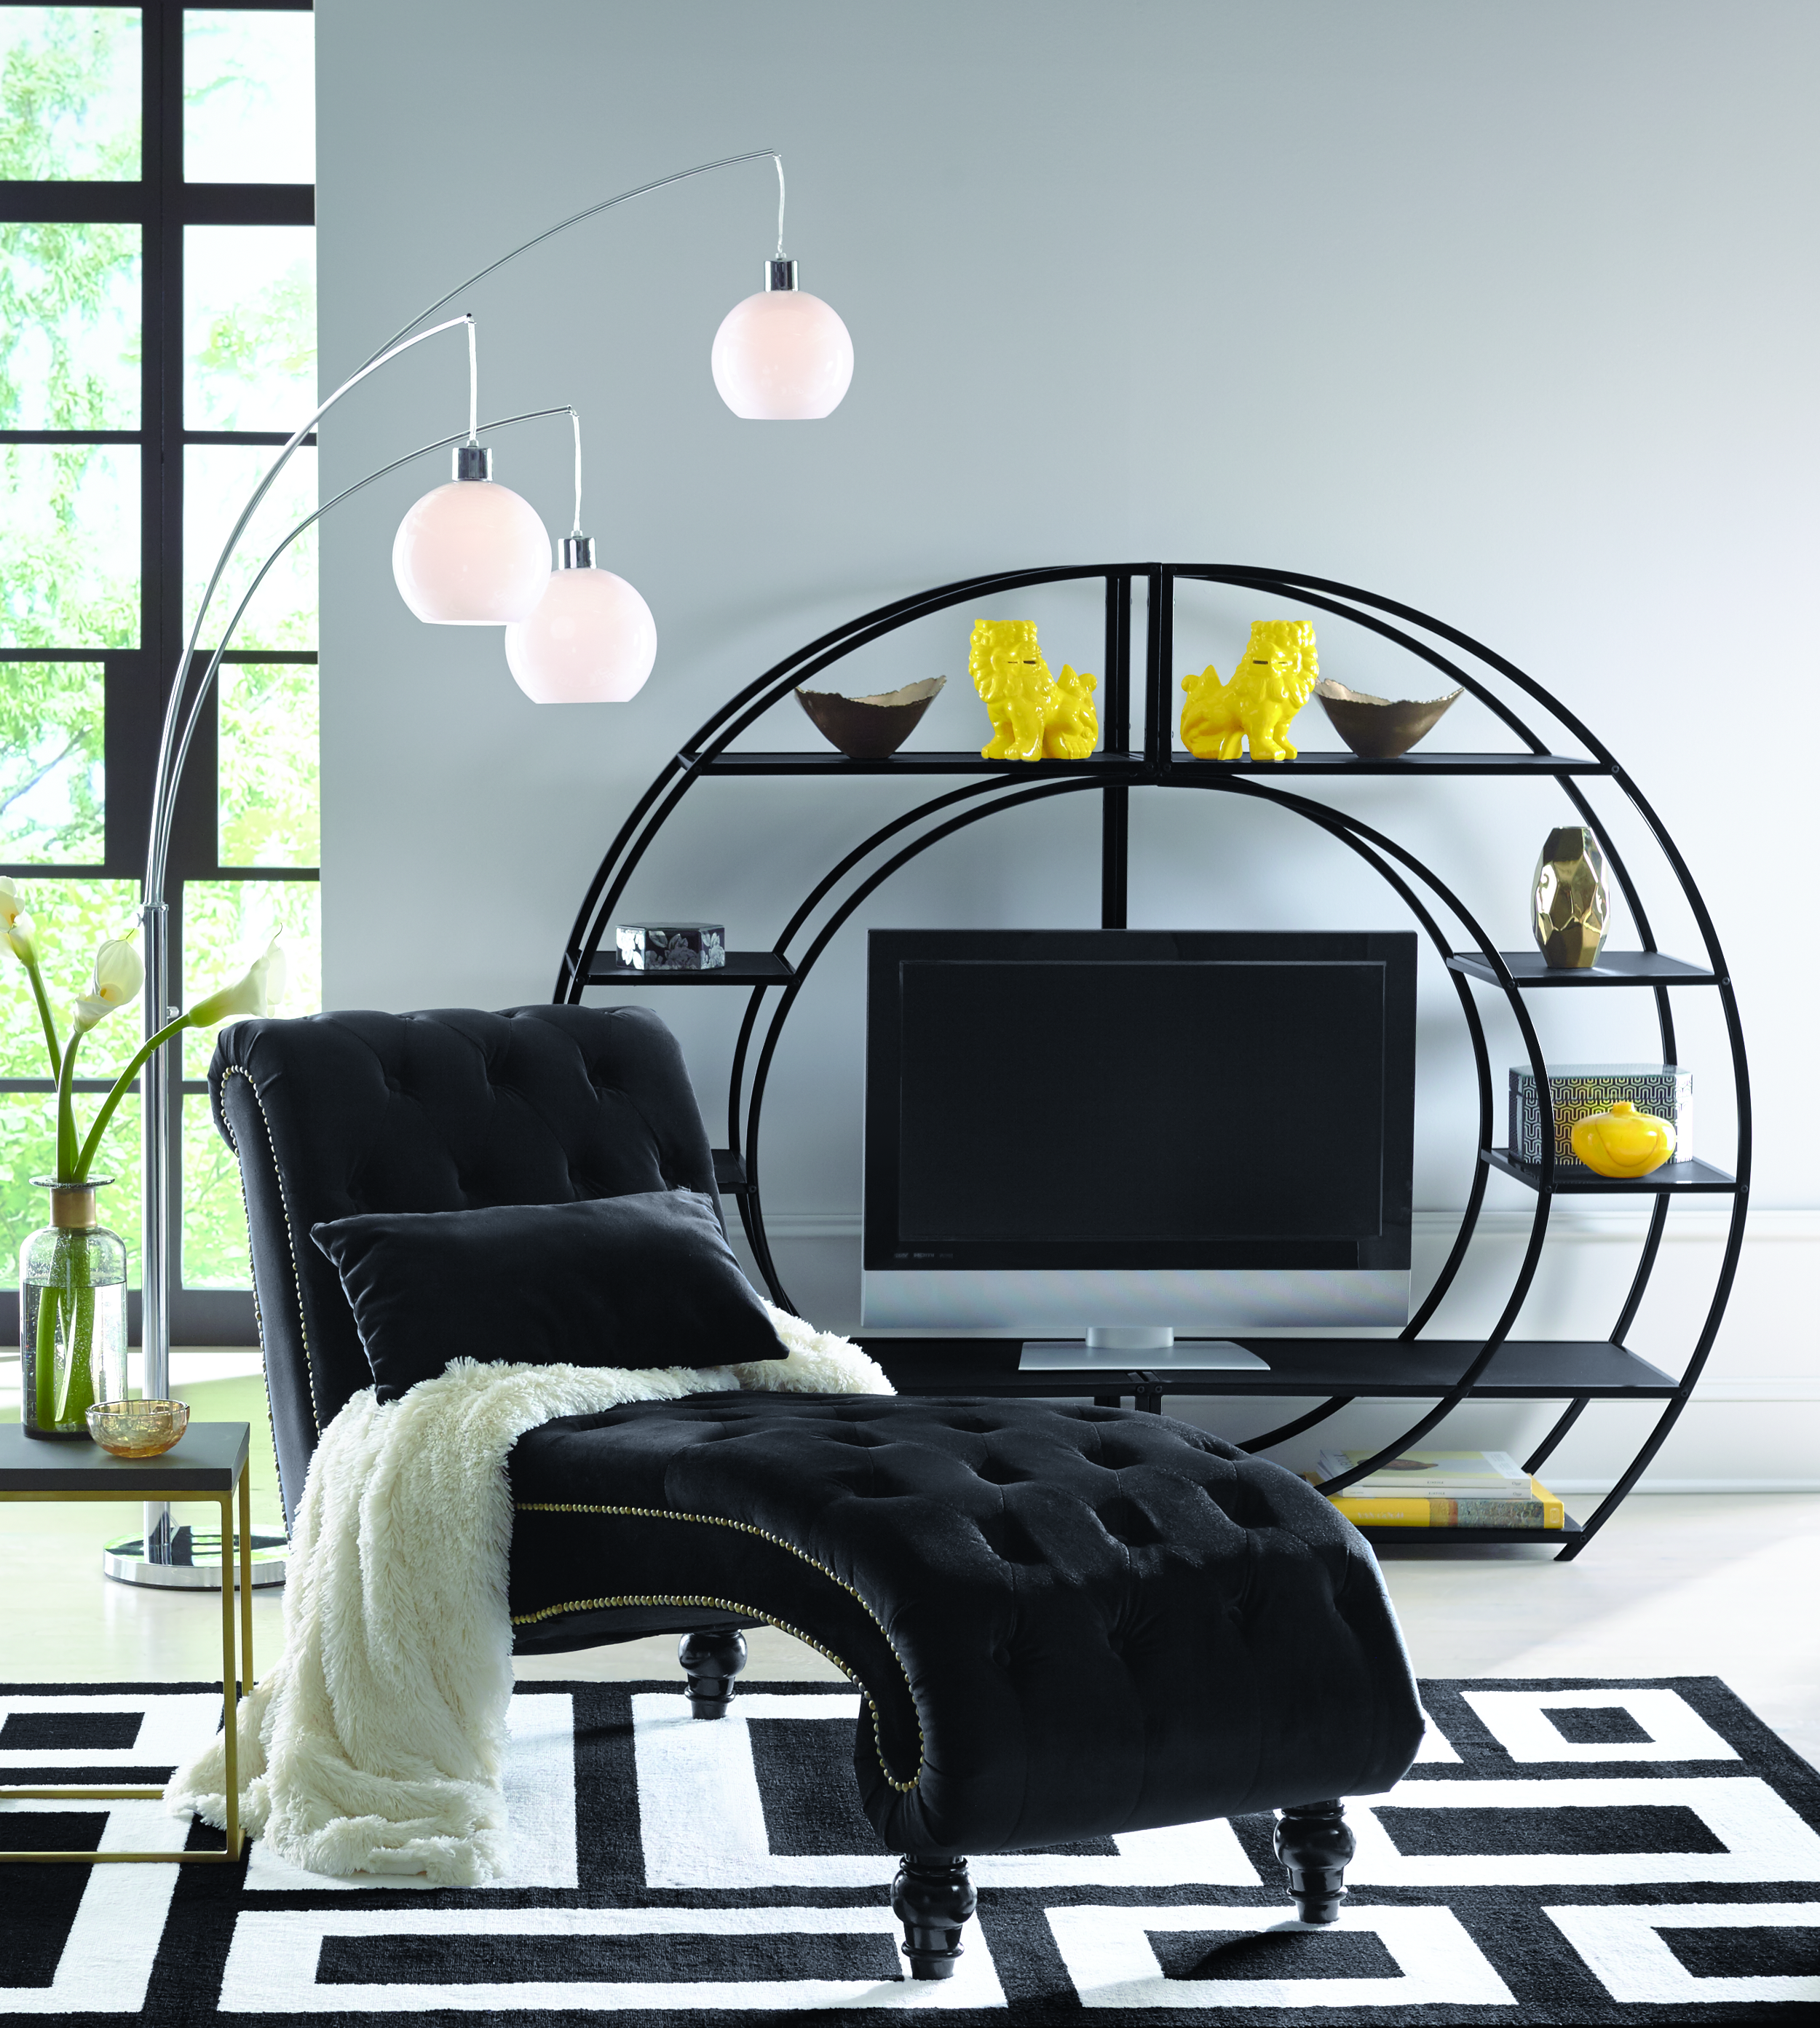 Black tufted chaise with a white plush throw, chrome floor lamp with three white globes, a black circle TV stand and shelves.